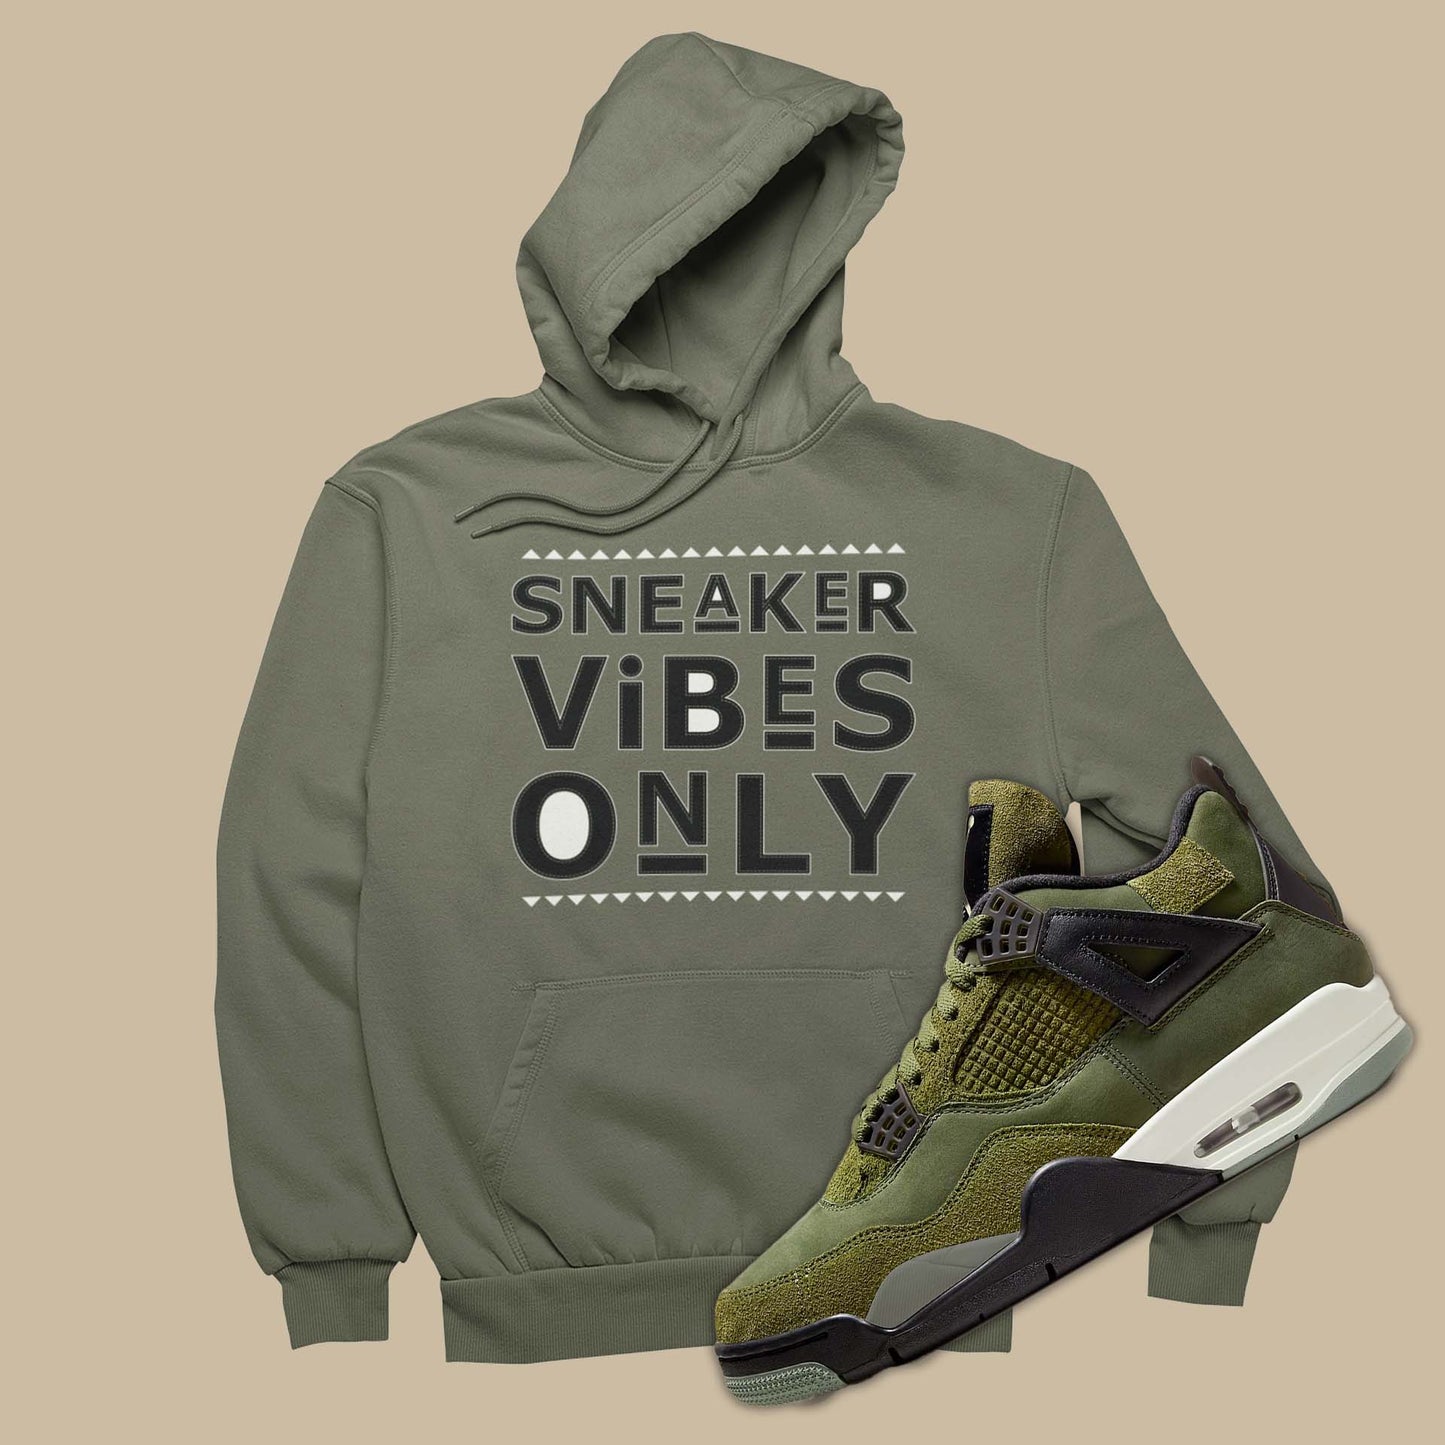 This sneaker match hoodie is the perfect sweatshirt to match your Air Jordan 4 Craft Medium Olive